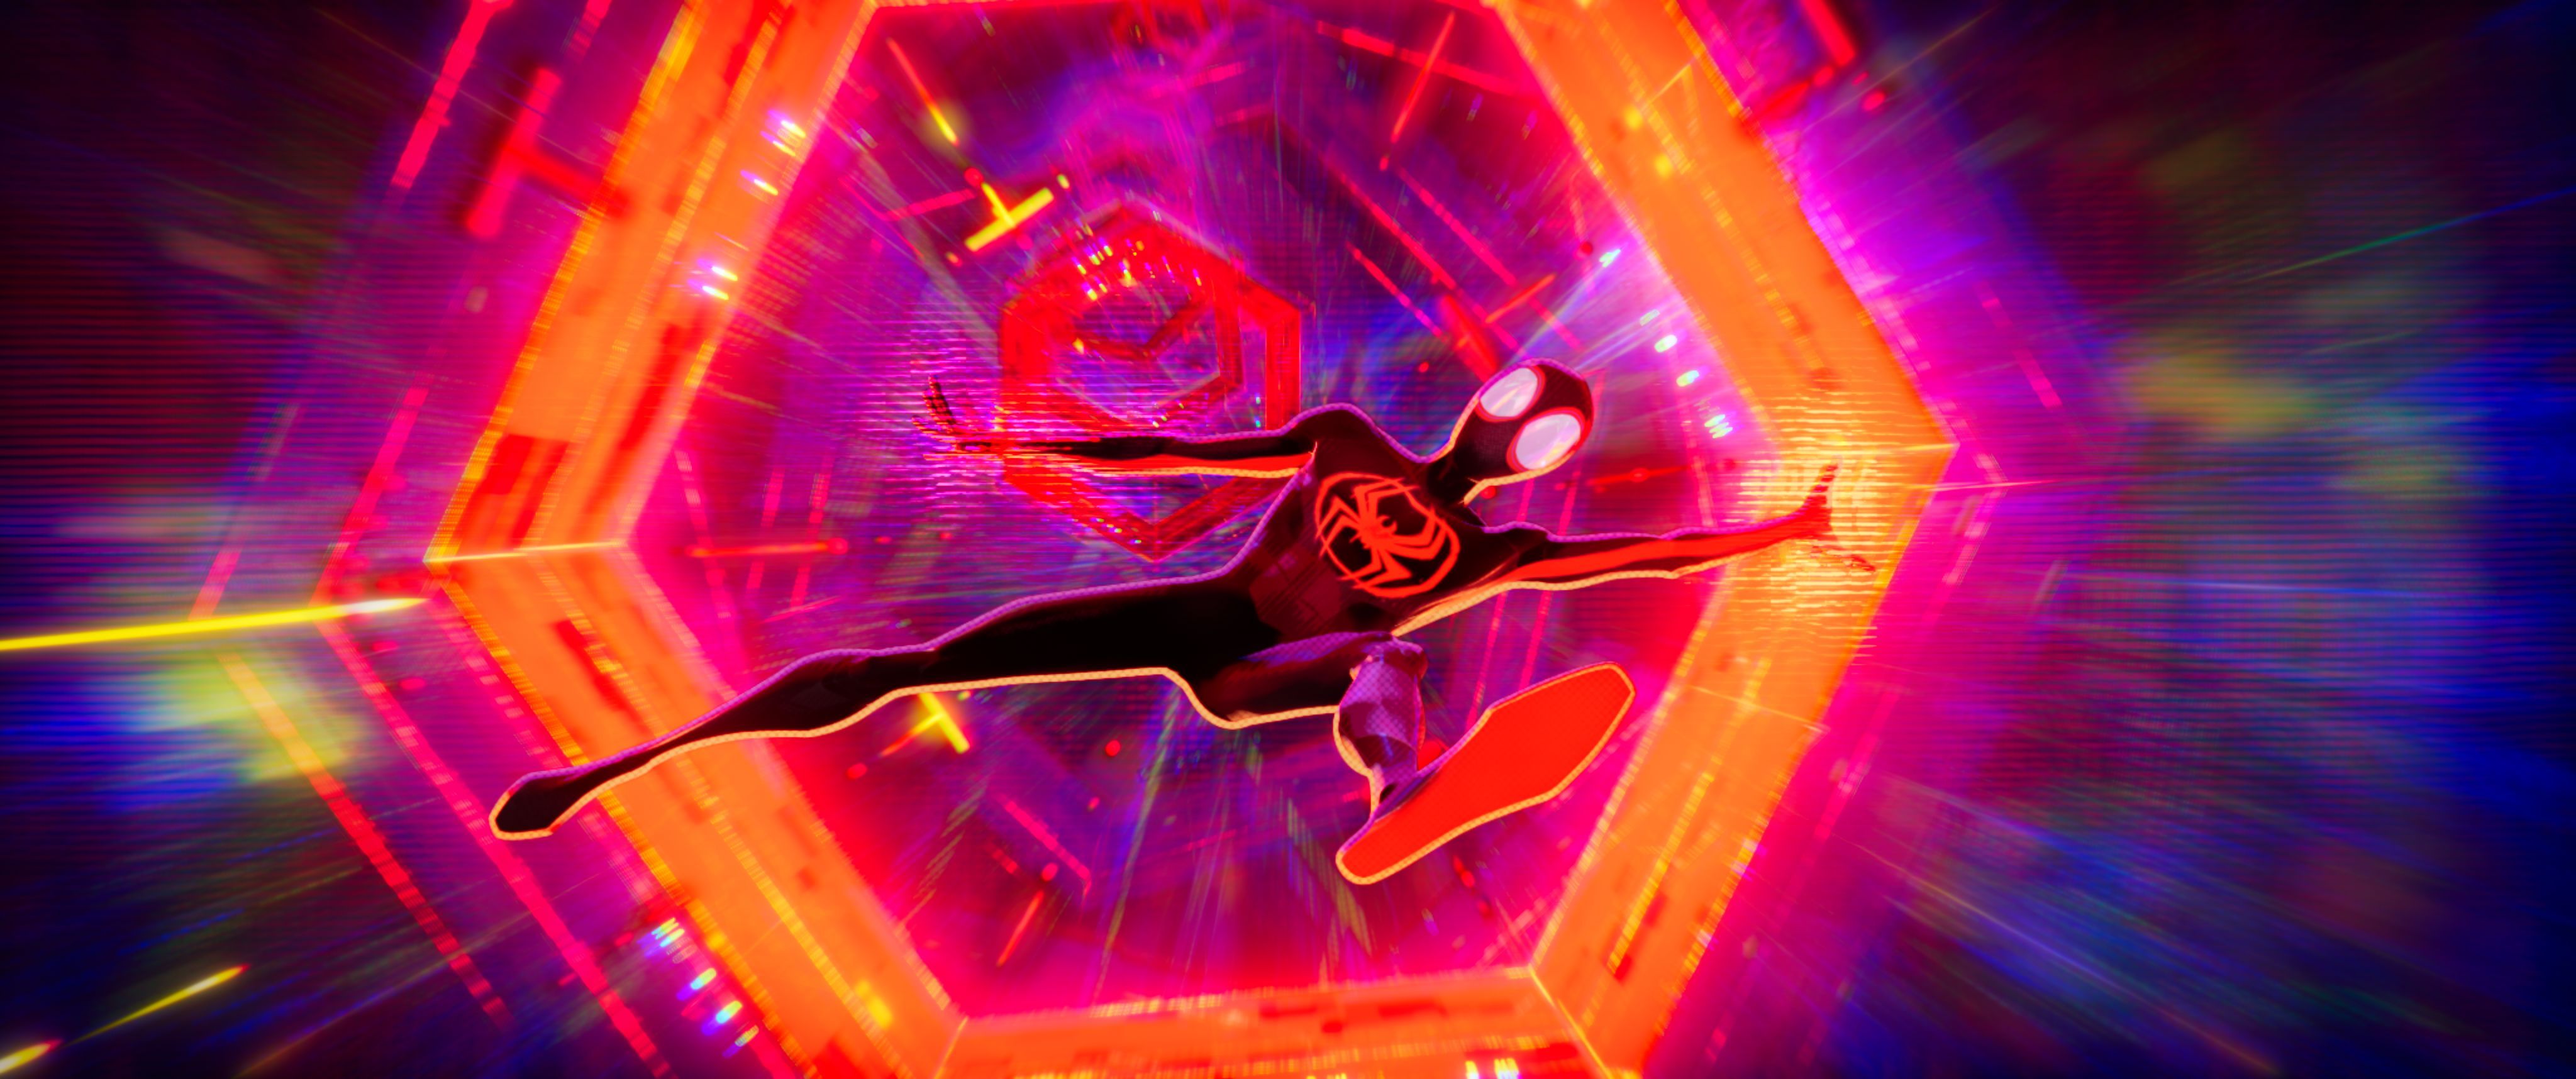 Spider-Man: Across the Spider-Verse Digital Release Makes One